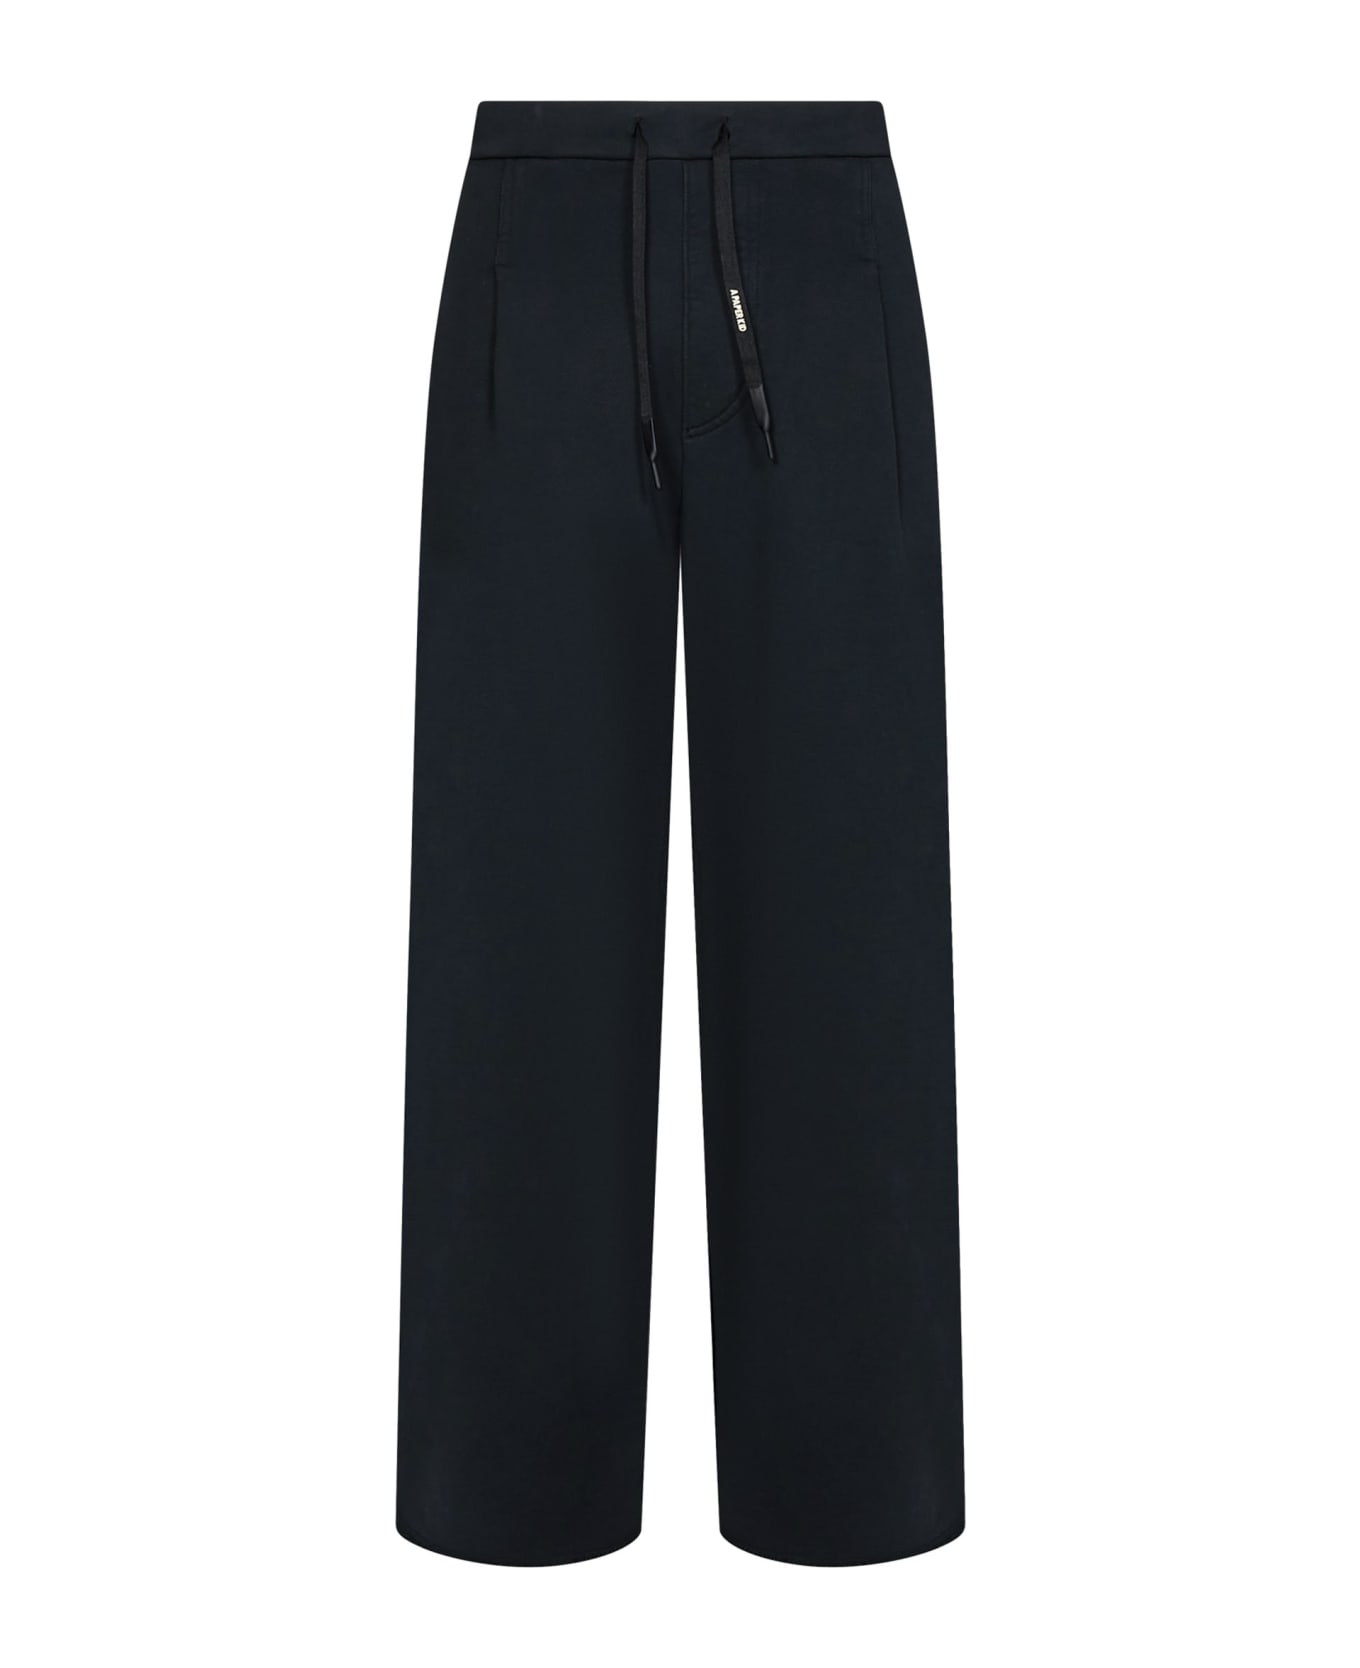 A Paper Kid Trousers - Black